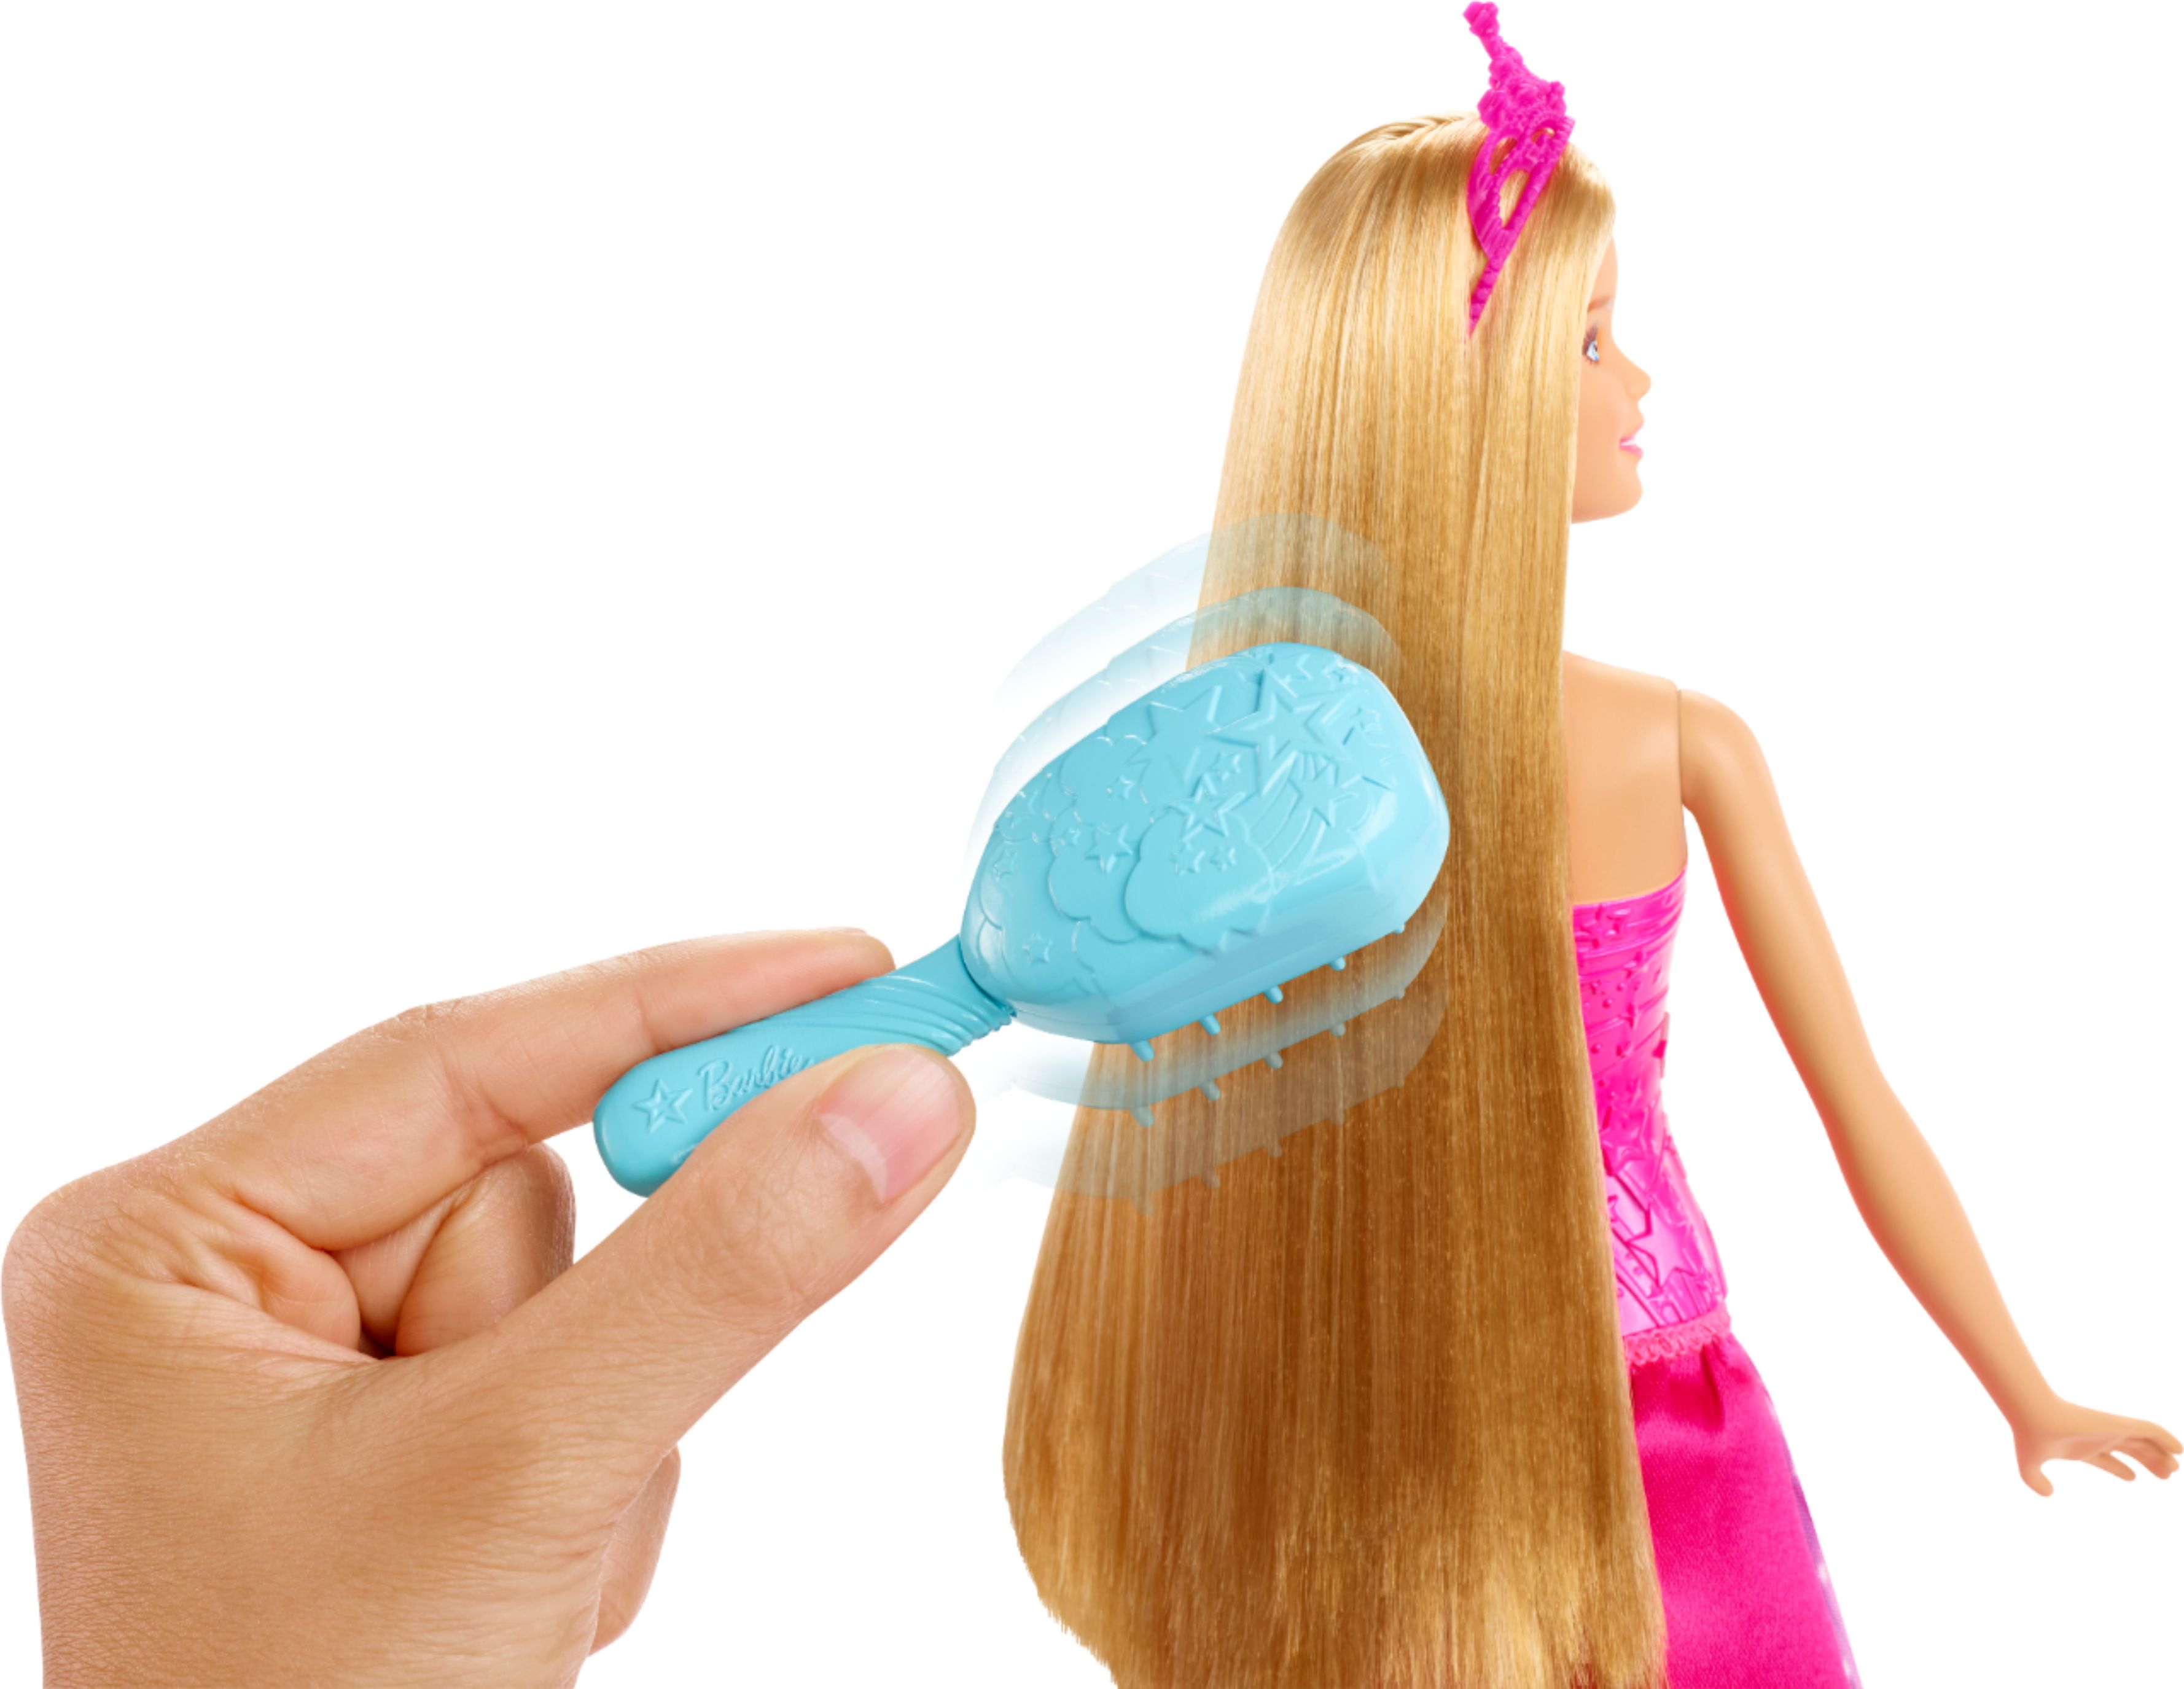 barbie brush and sparkle